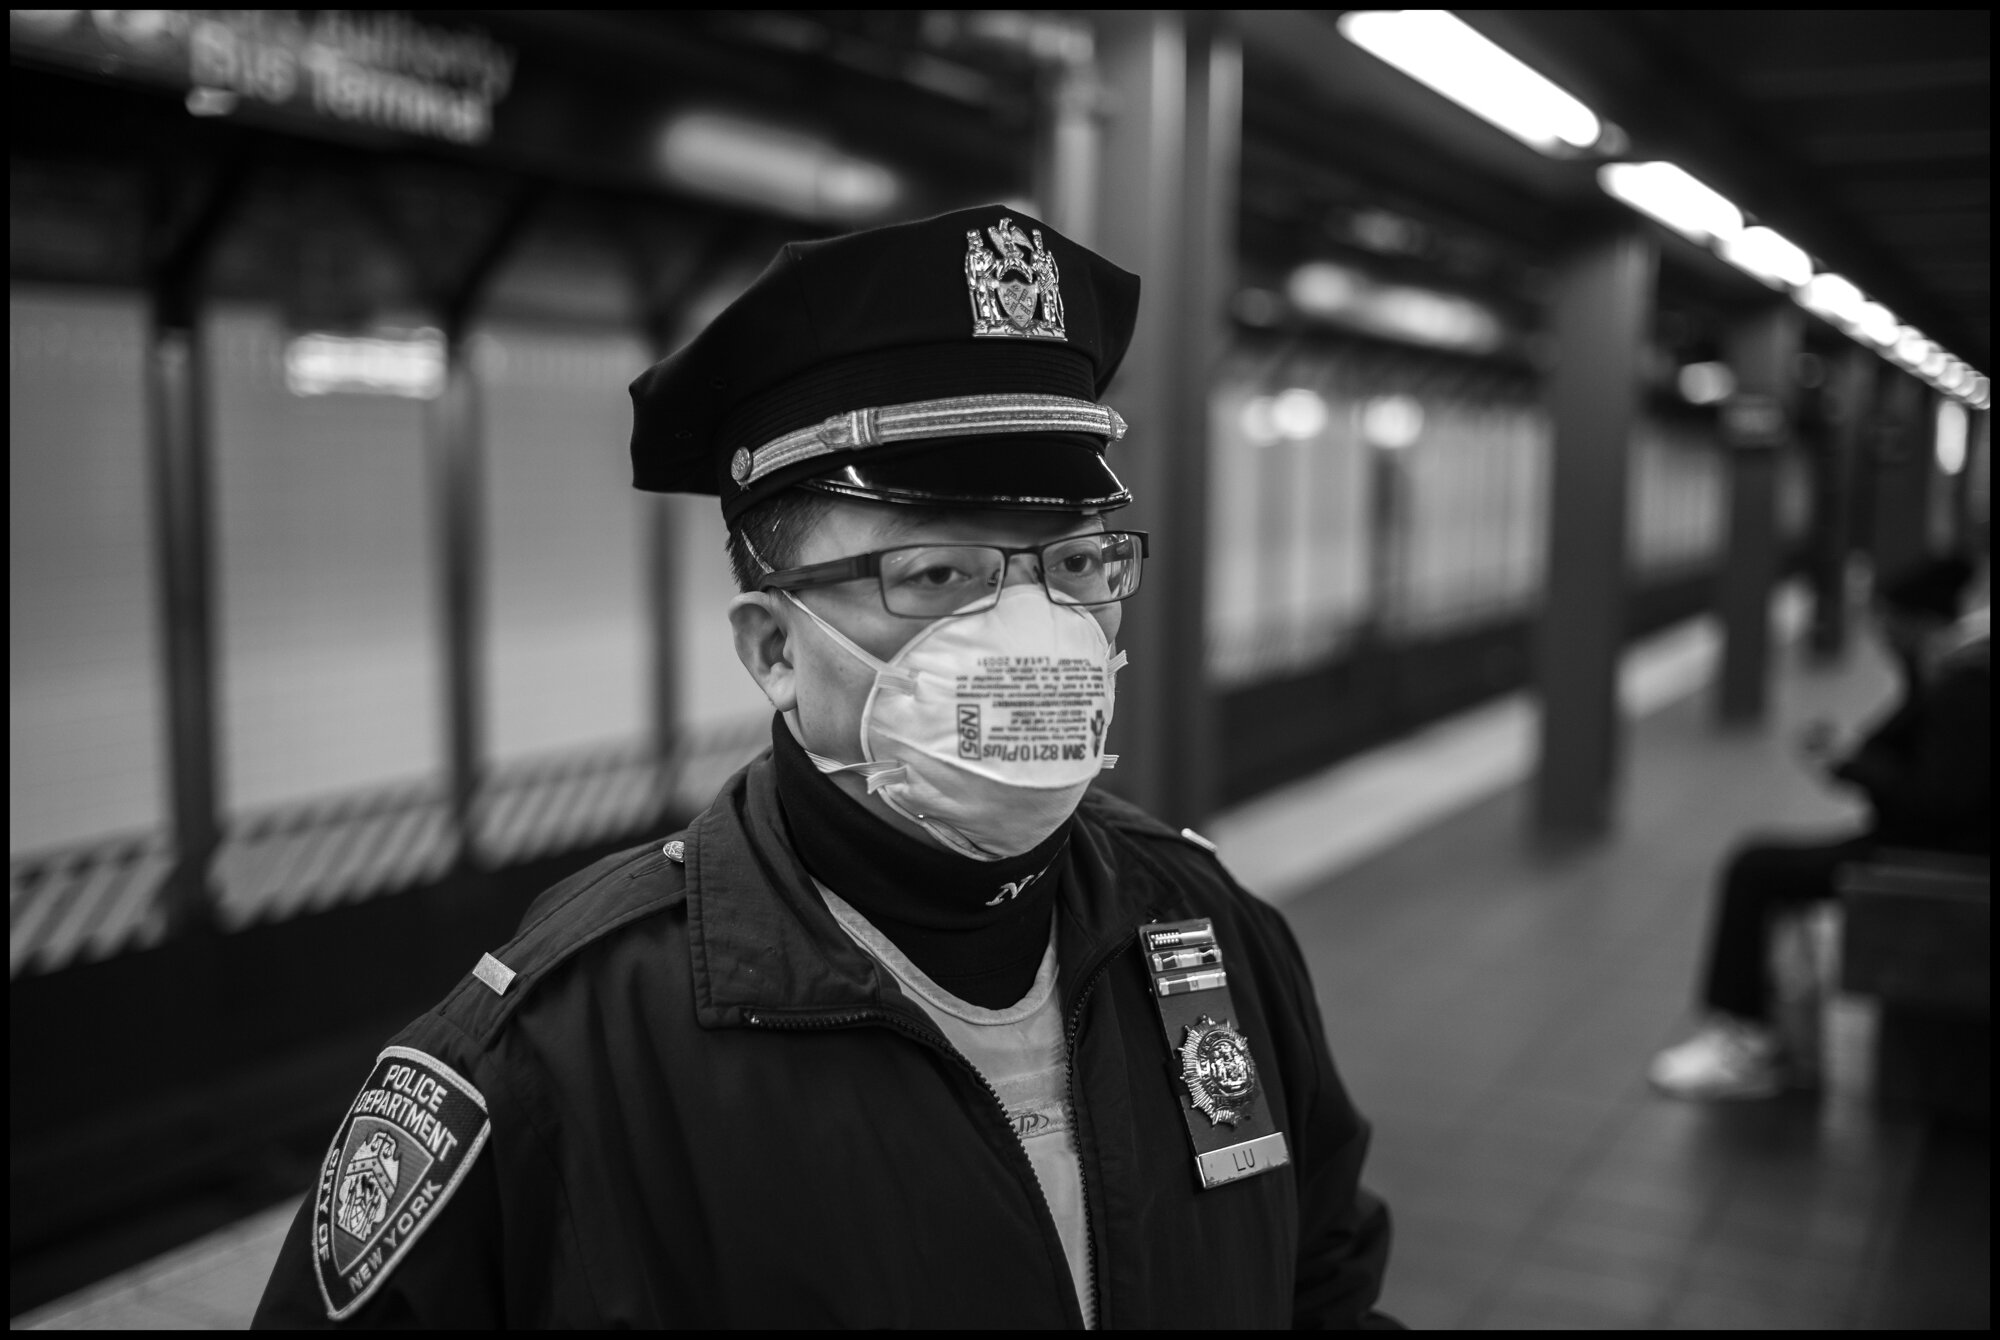  Lou, is a New York City policeman, stands patrol at the Grand Central Subway stop.  March 26, 2020 ©Peter Turnley  ID# 04-006 